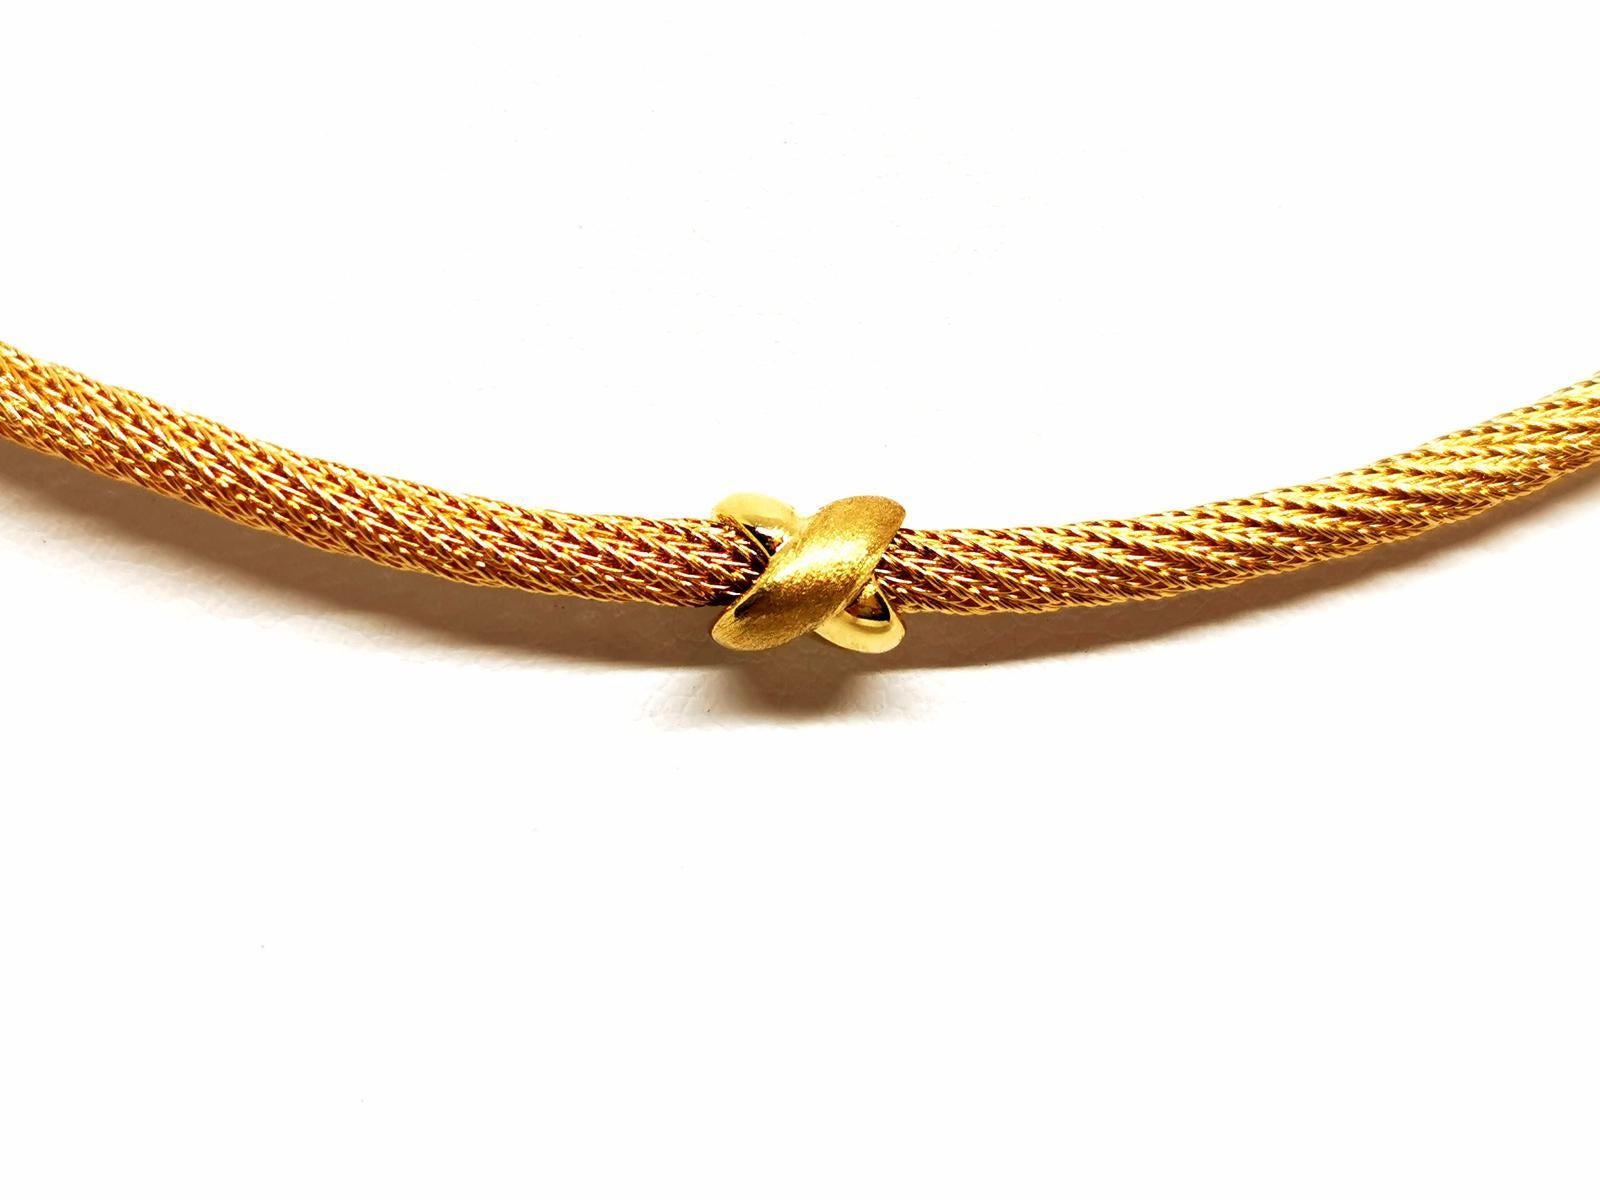 Necklace in yellow gold 750 thousandths (18 carats). cable mesh with fixed beads in the shape of a matte and shiny knot and buoy clasp. length: 45.5 cm. width: 0.33 cm. total weight: 20.21 g. eagle head hallmark. excellent condition.
